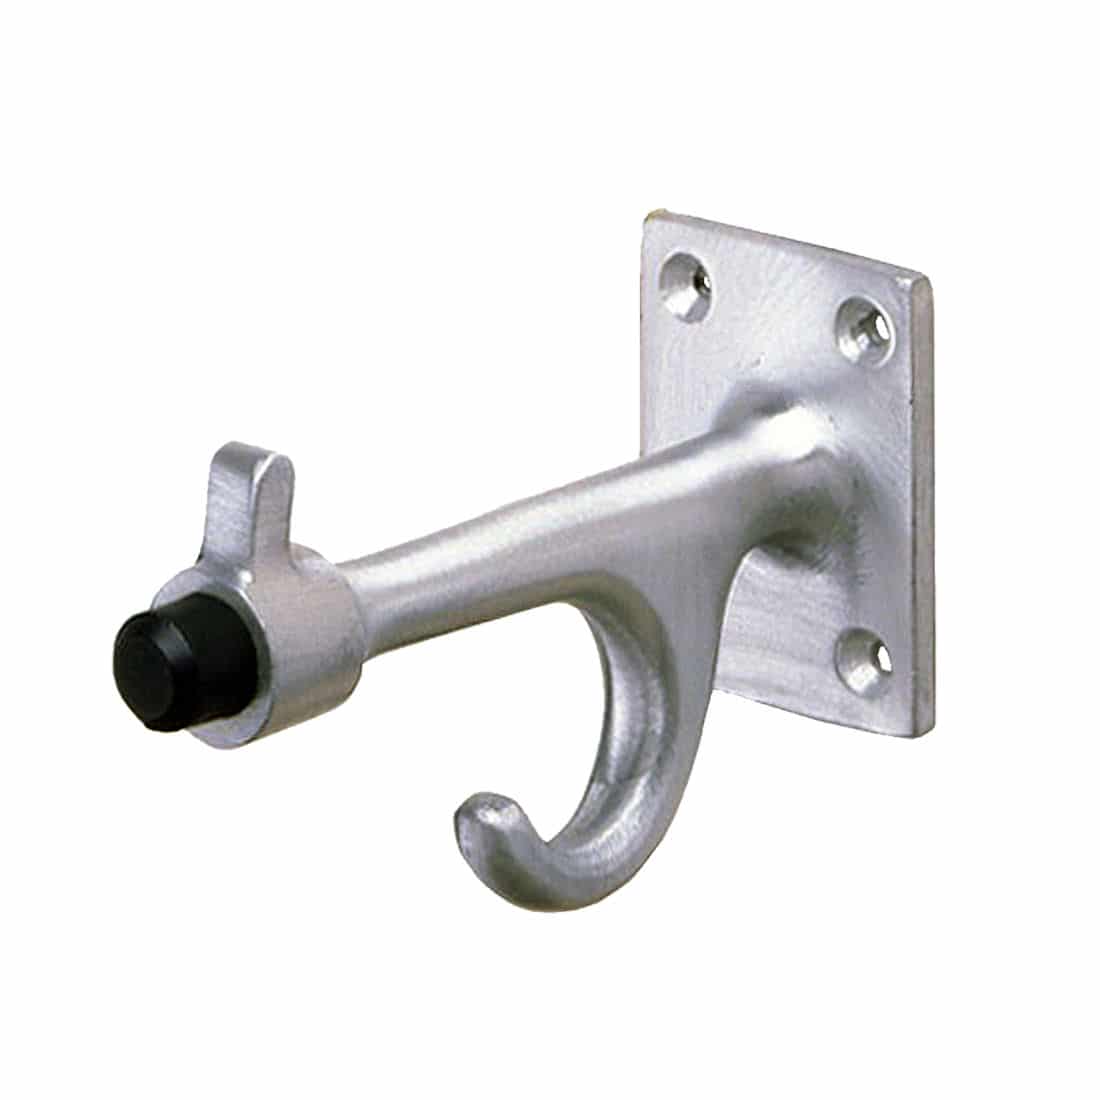 Pack of 1 3-1/2 inch Projection x 2-3/4 inch High Sentry Supply 650-6632 Toilet Partition Coat Hook and Bumper